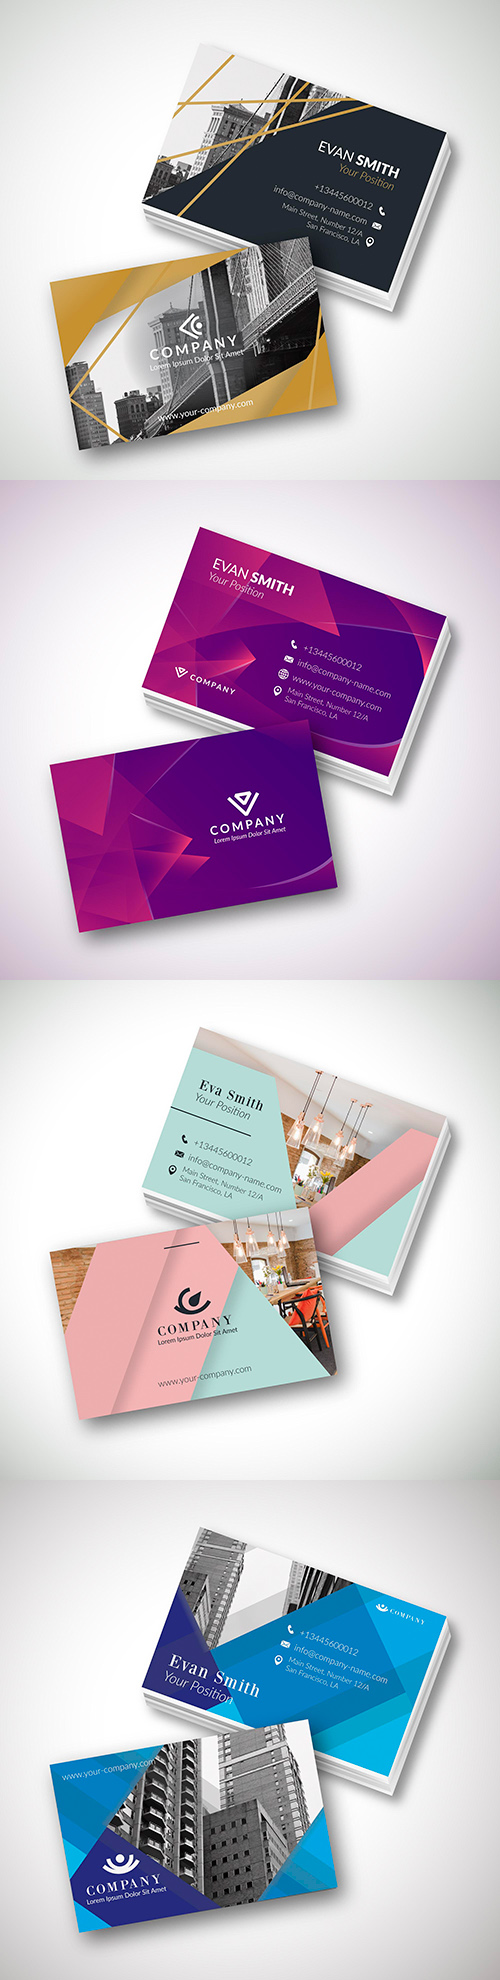 Modern template business card design with photo
